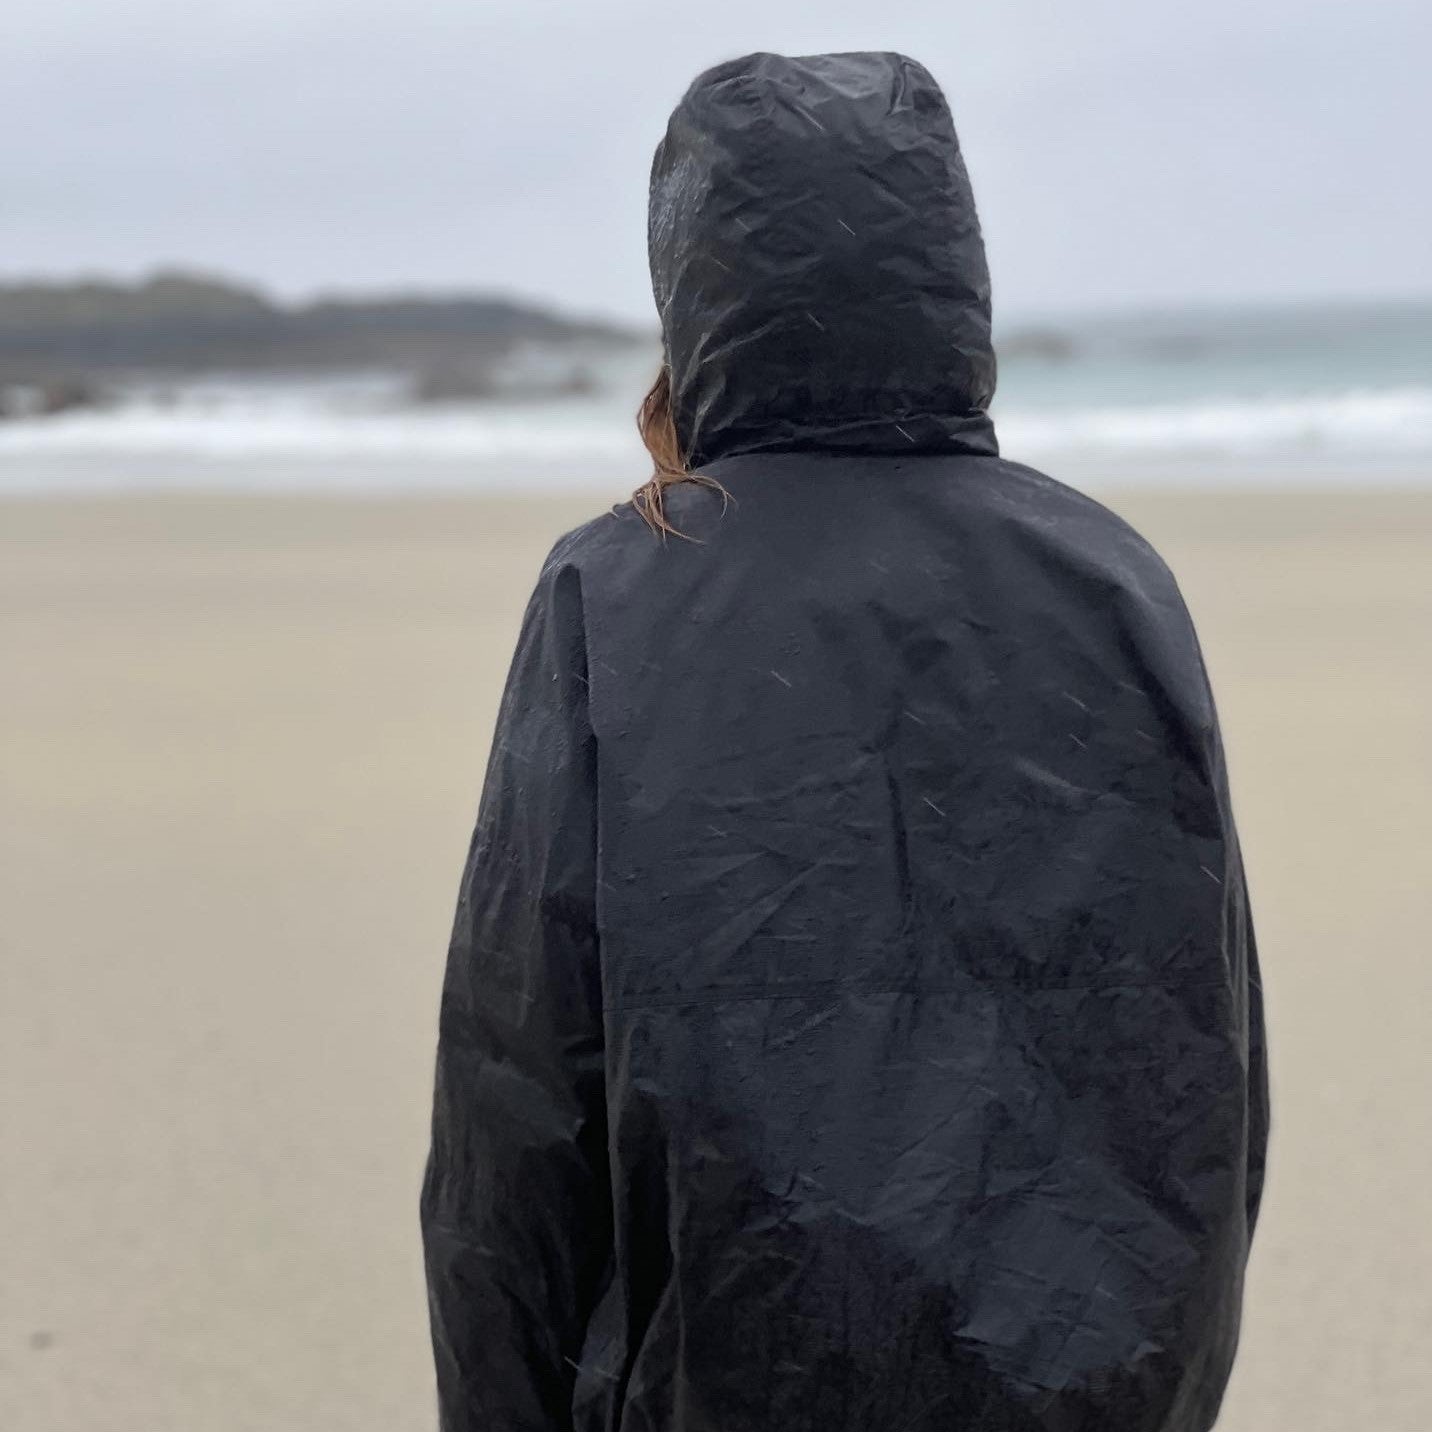 The Treshnish Windsmock is made from a lightweight 100% Organic Cotton made by Halley Stevensons of Dundee.  The colour here is Vulkan blue.  This coat is windproof and  showerproof but not waterproof in heavy rain.